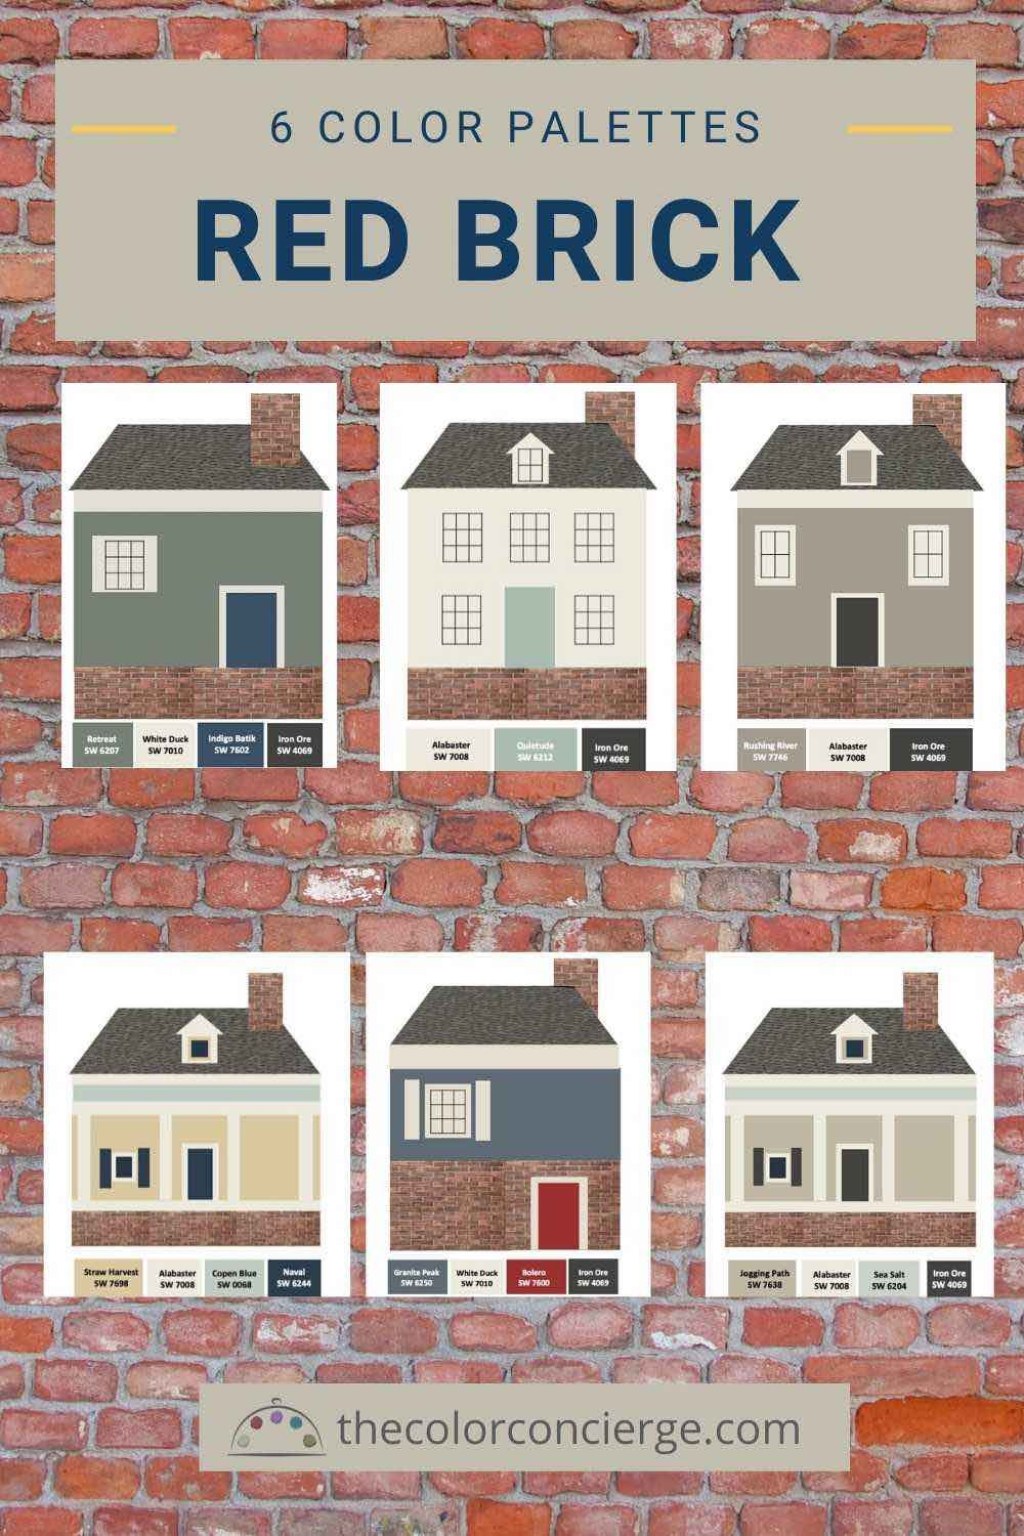 Picture of: More Palettes for Red Brick Houses  Red brick house exterior